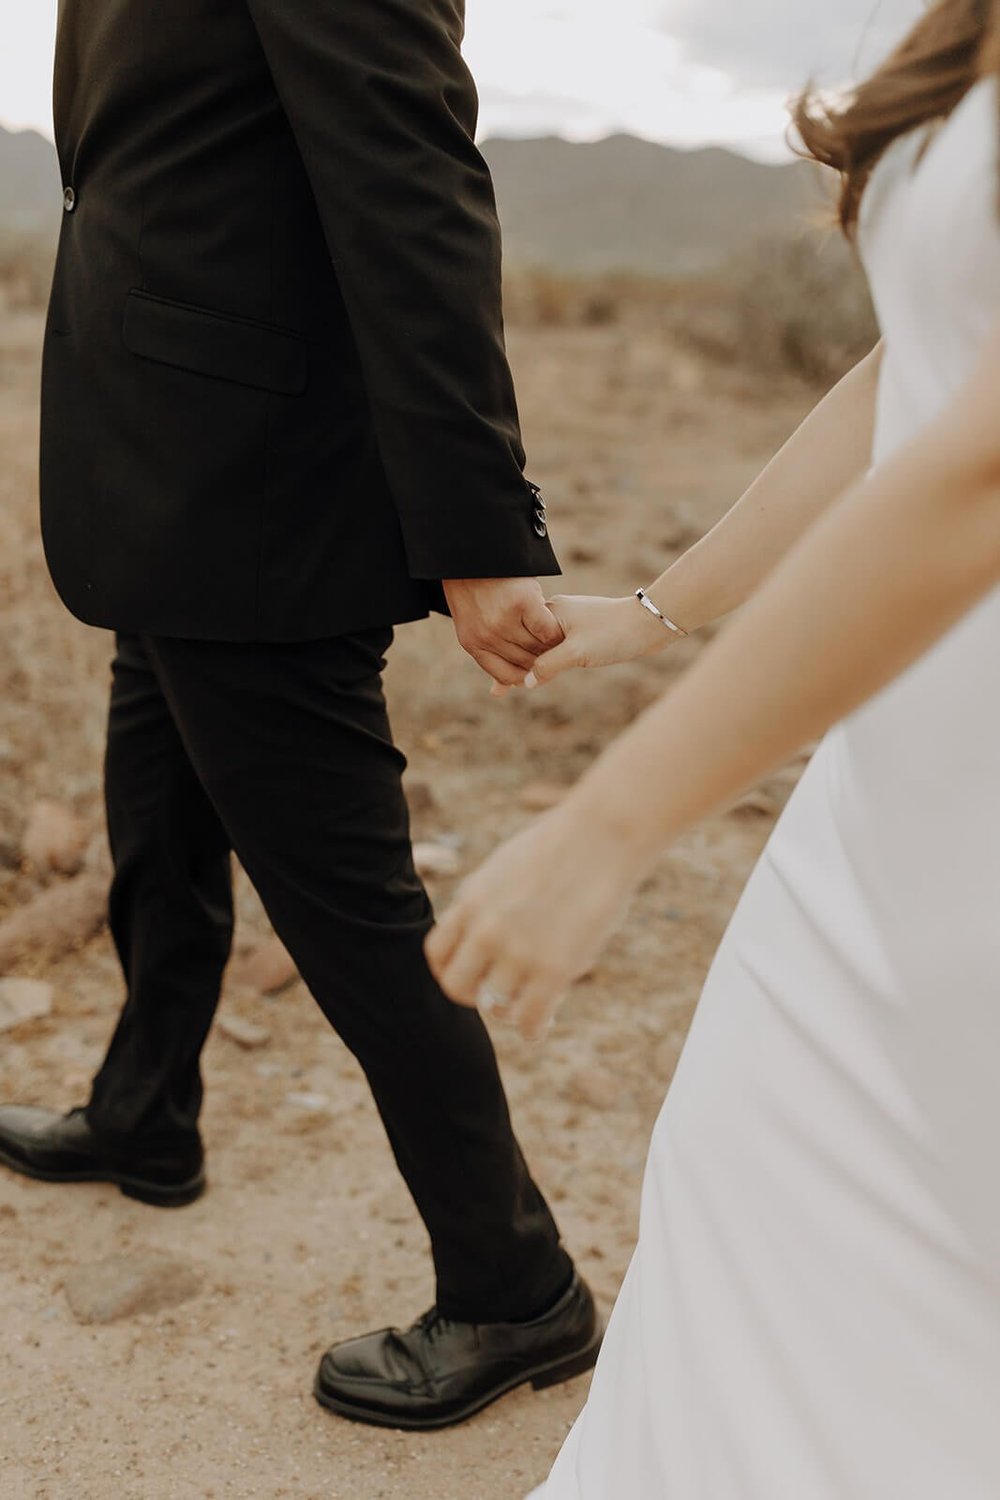 Bride and groom holding hands while walking through the Arizona desert